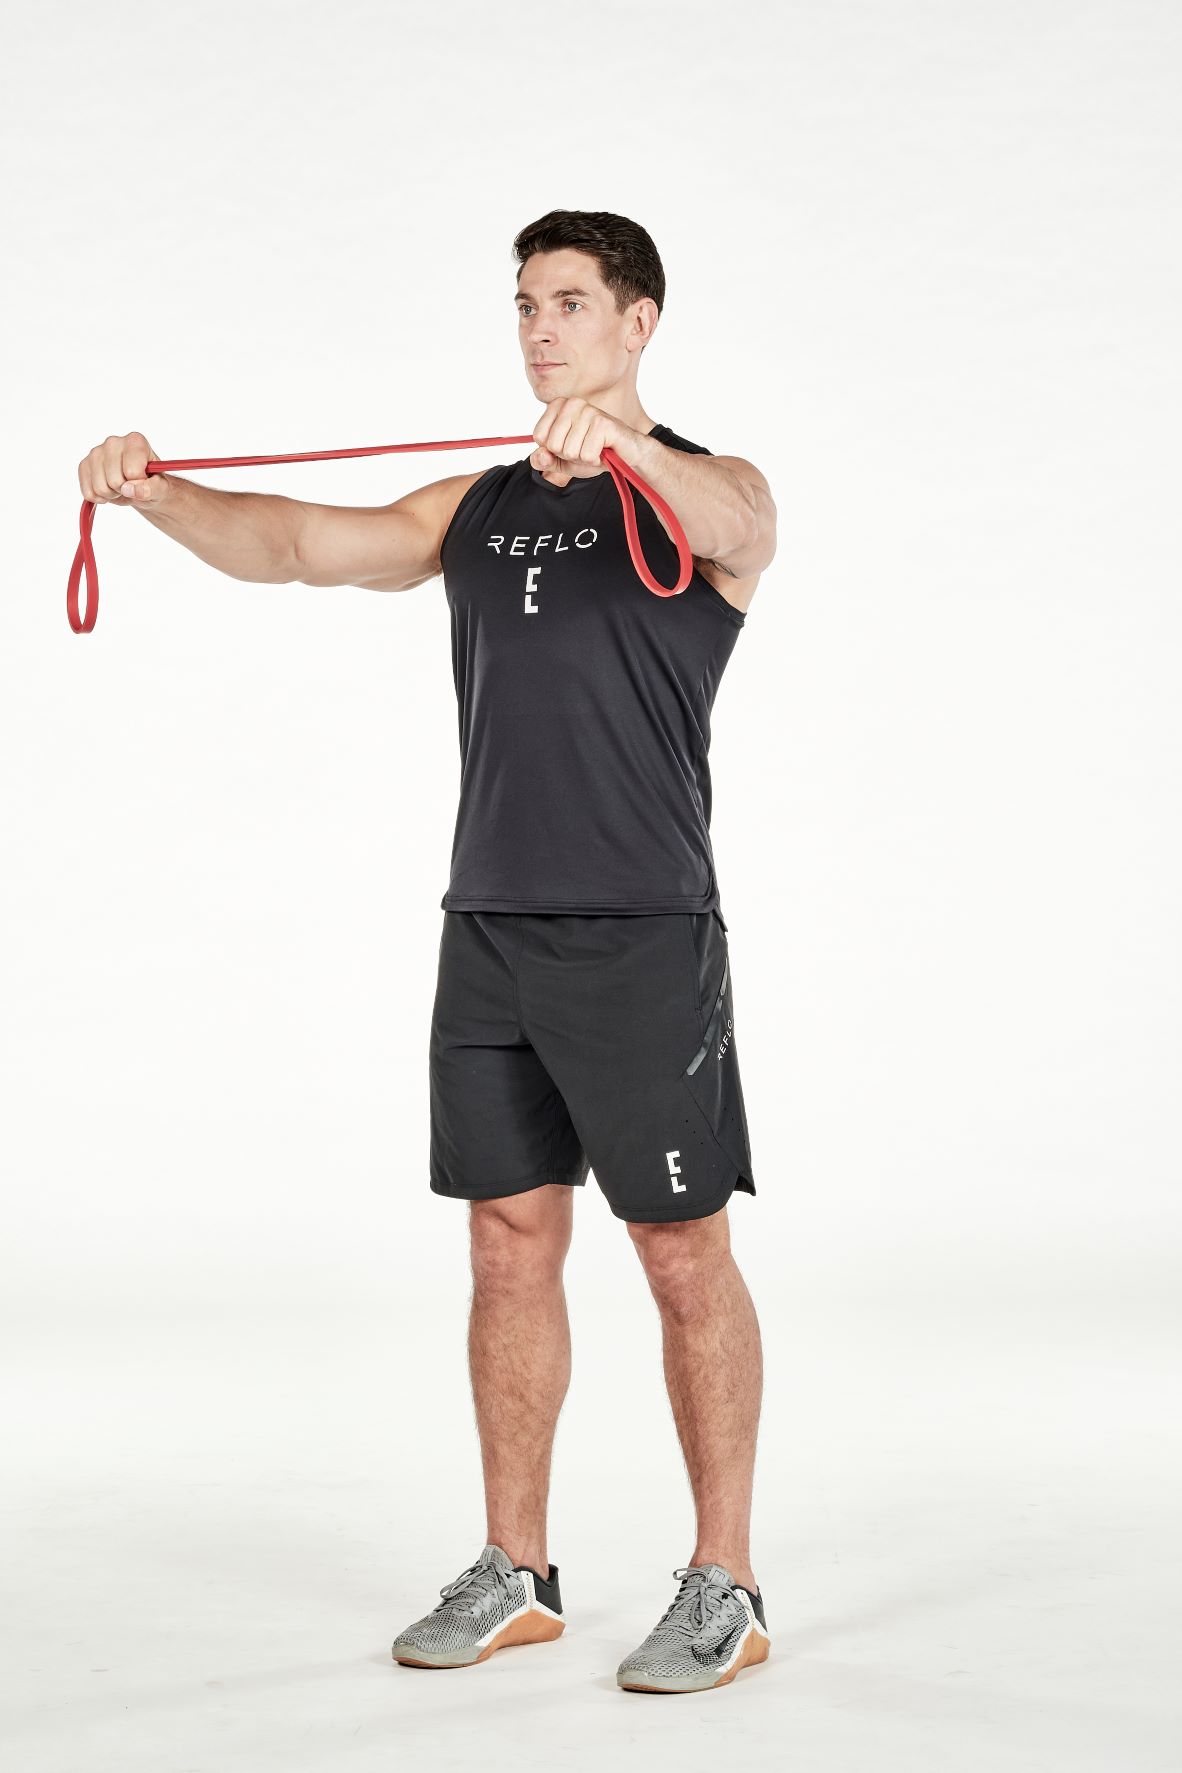 man demonstrating step one ofreverse fly; standing up straight, he holds a resistance band out in front of him in both hands, shoulder width apart; he wears a black fitness vest, black shorts and trainers